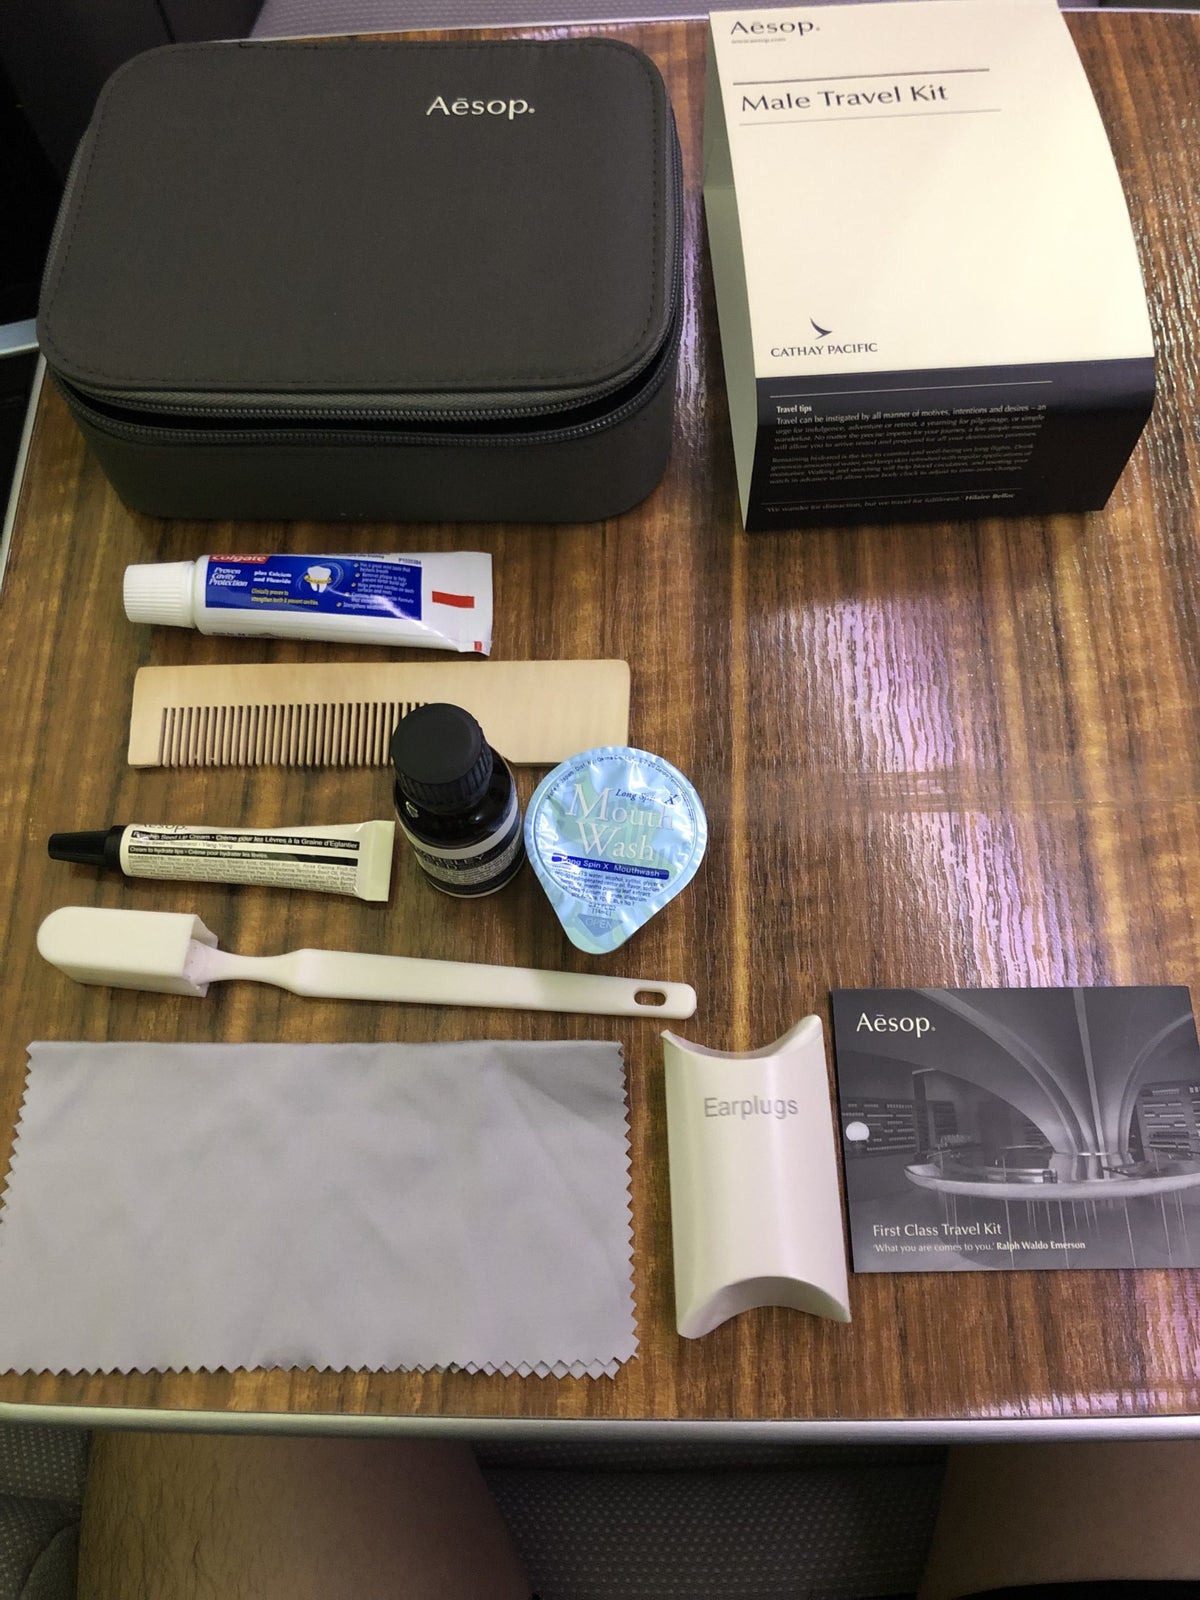 Cathay Pacific 777 first class amenity kit contents